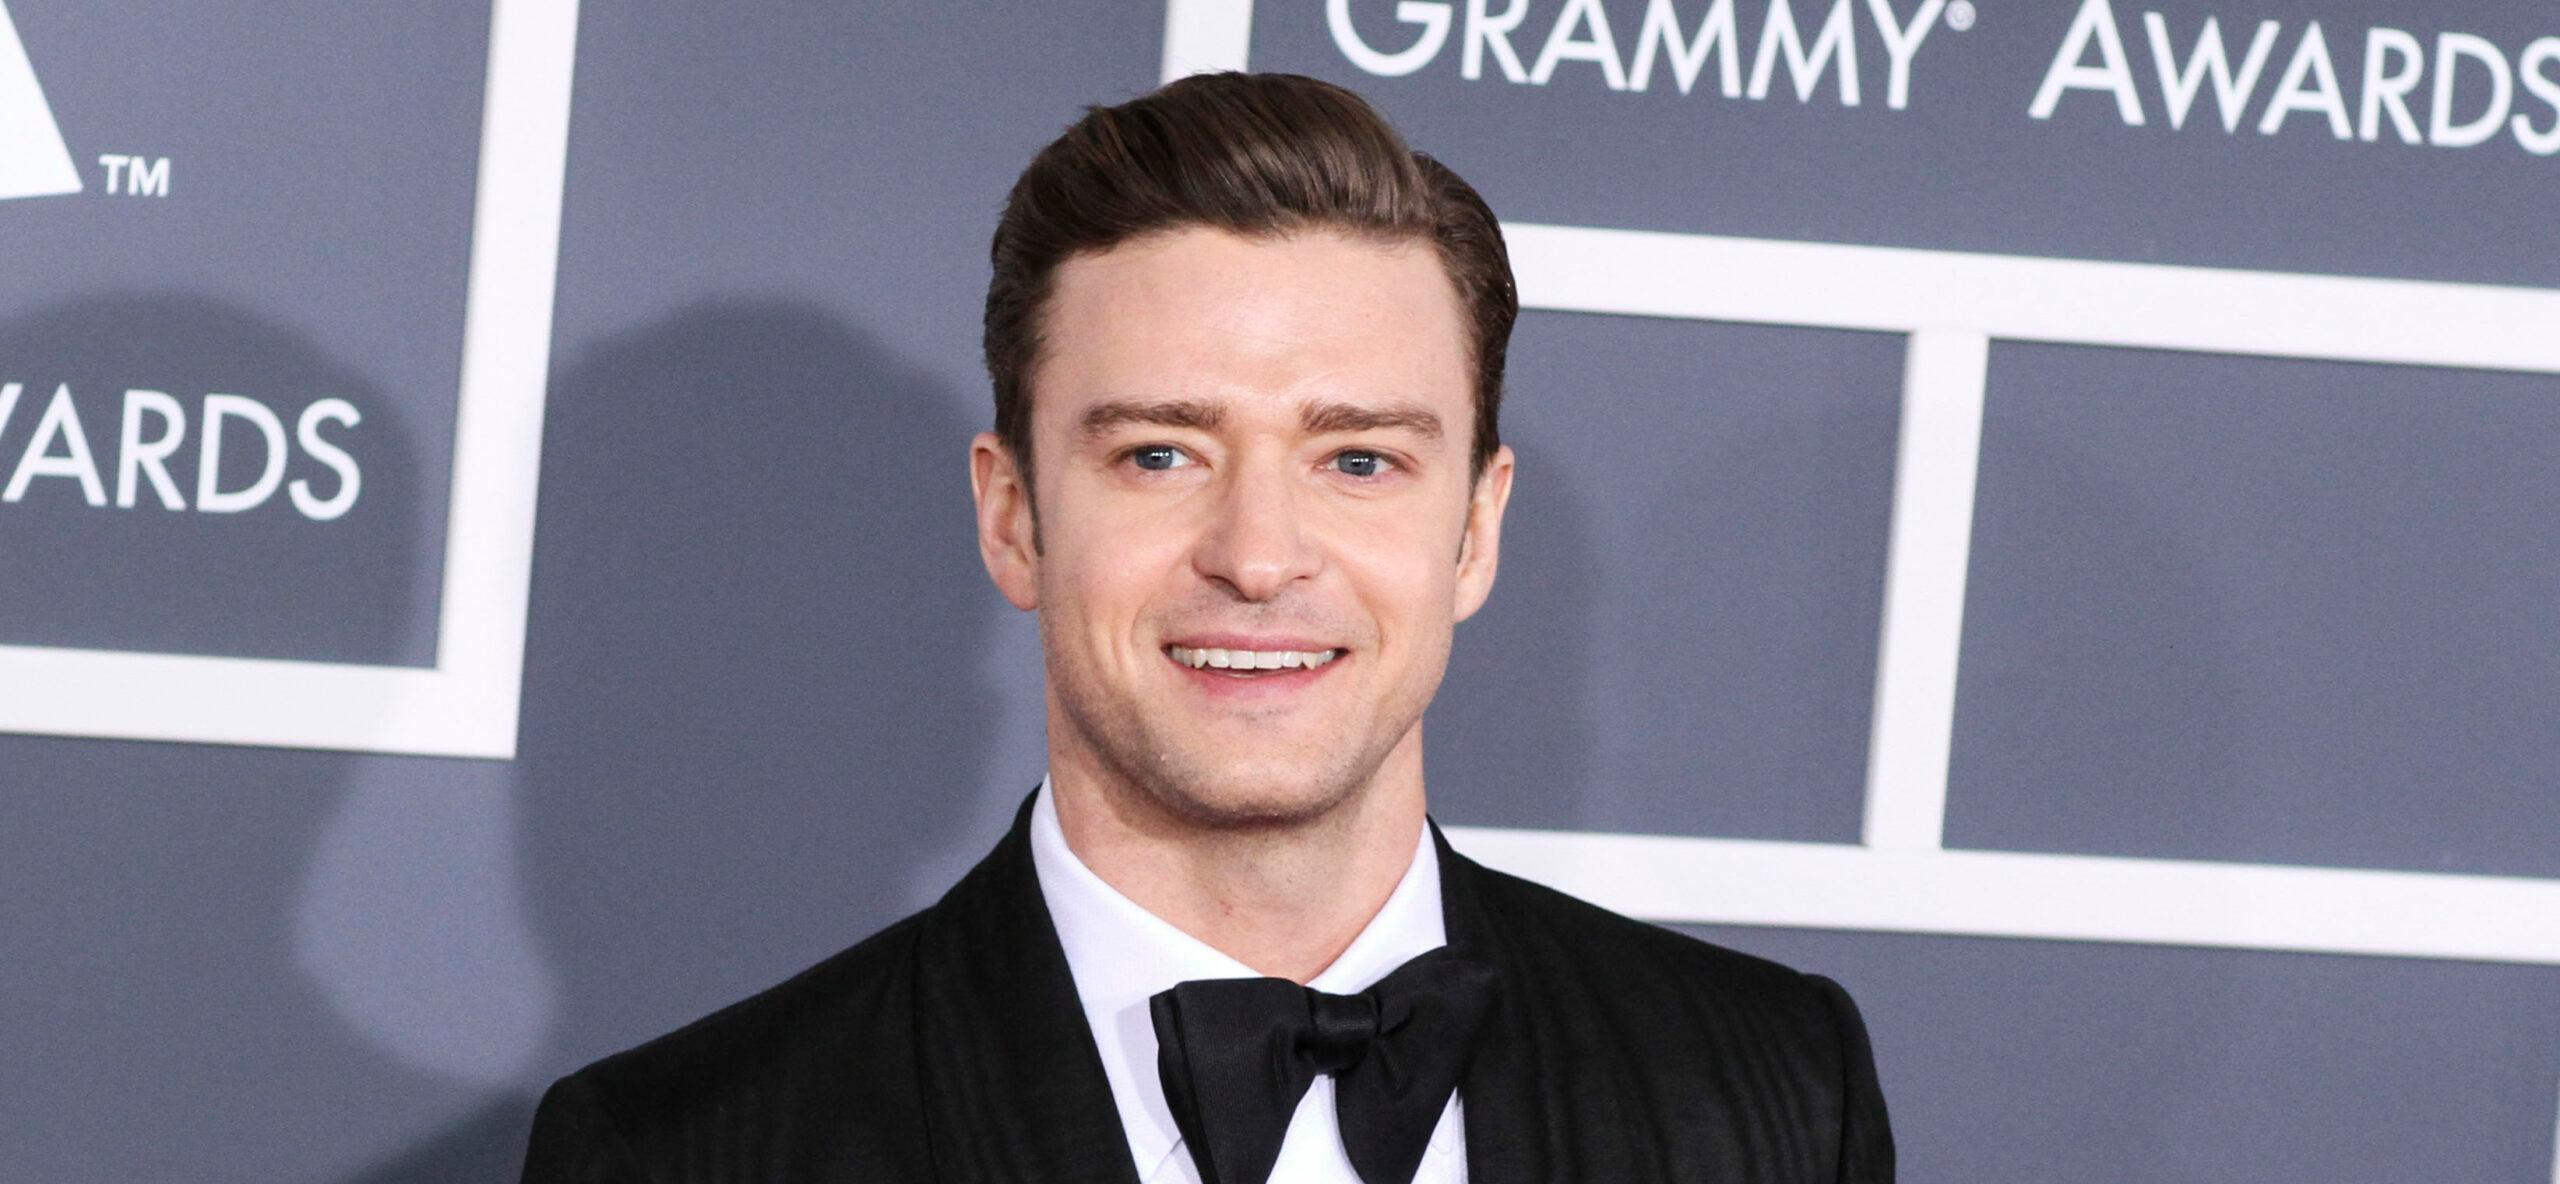 Justin Timberlake at the 55th Annual GRAMMY Awards